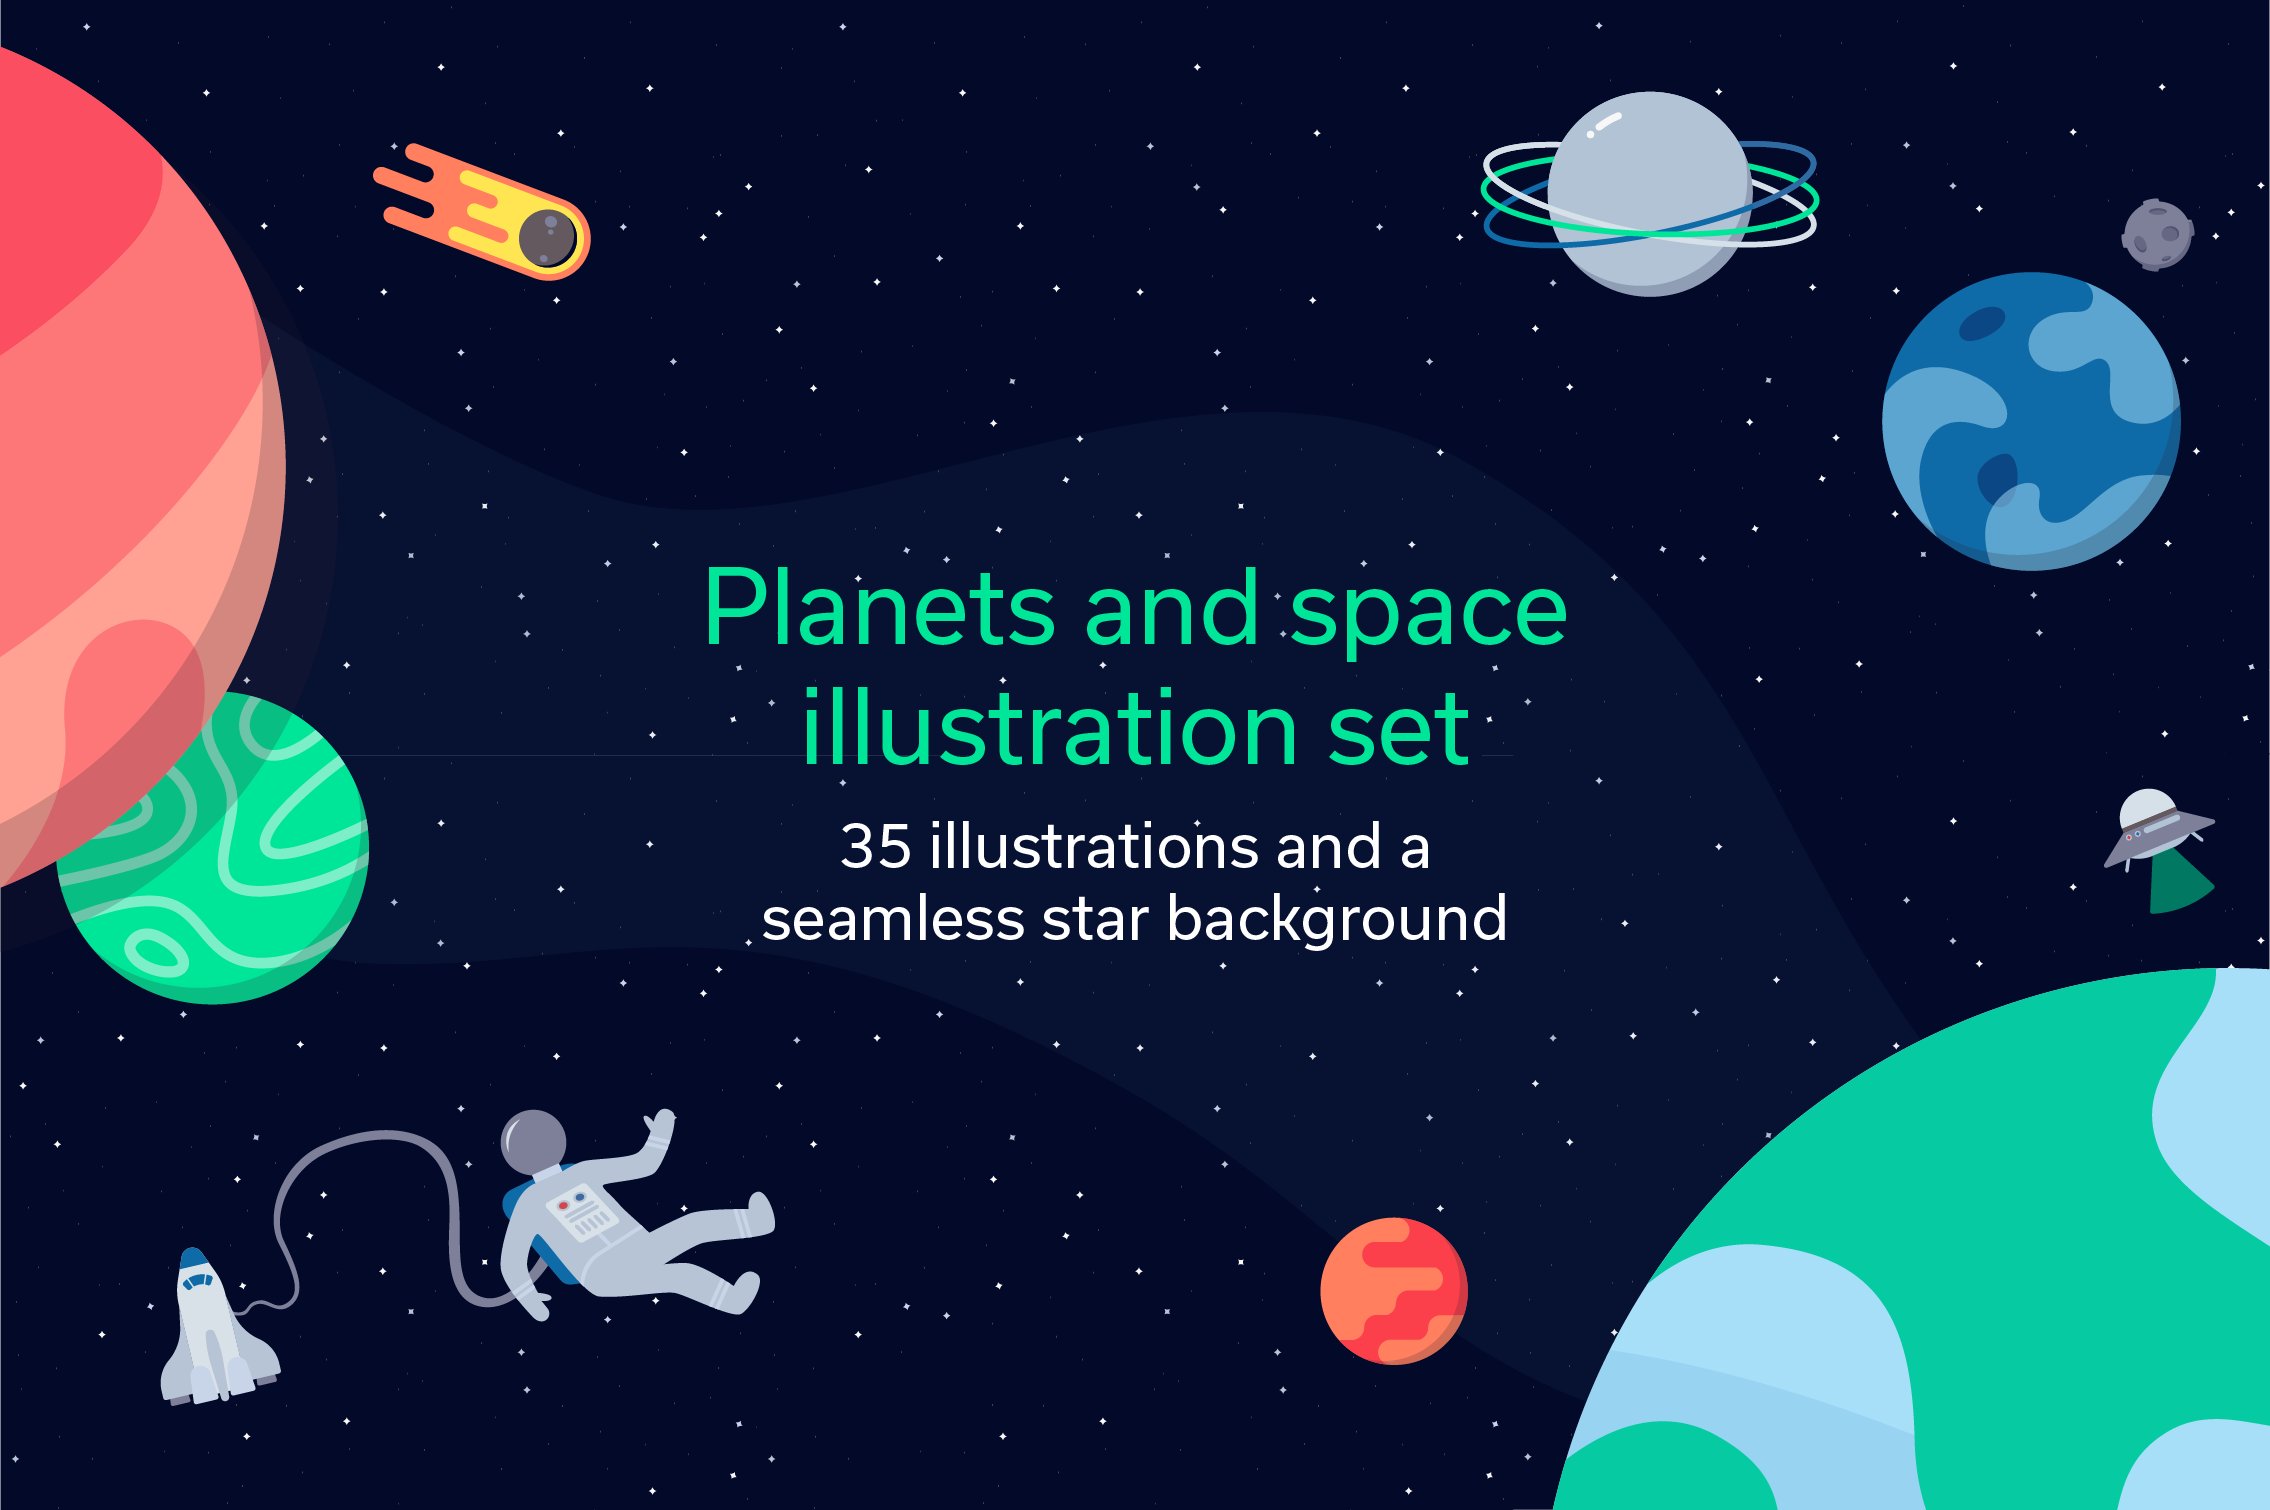 Planets and Space Illustration Set cover image.